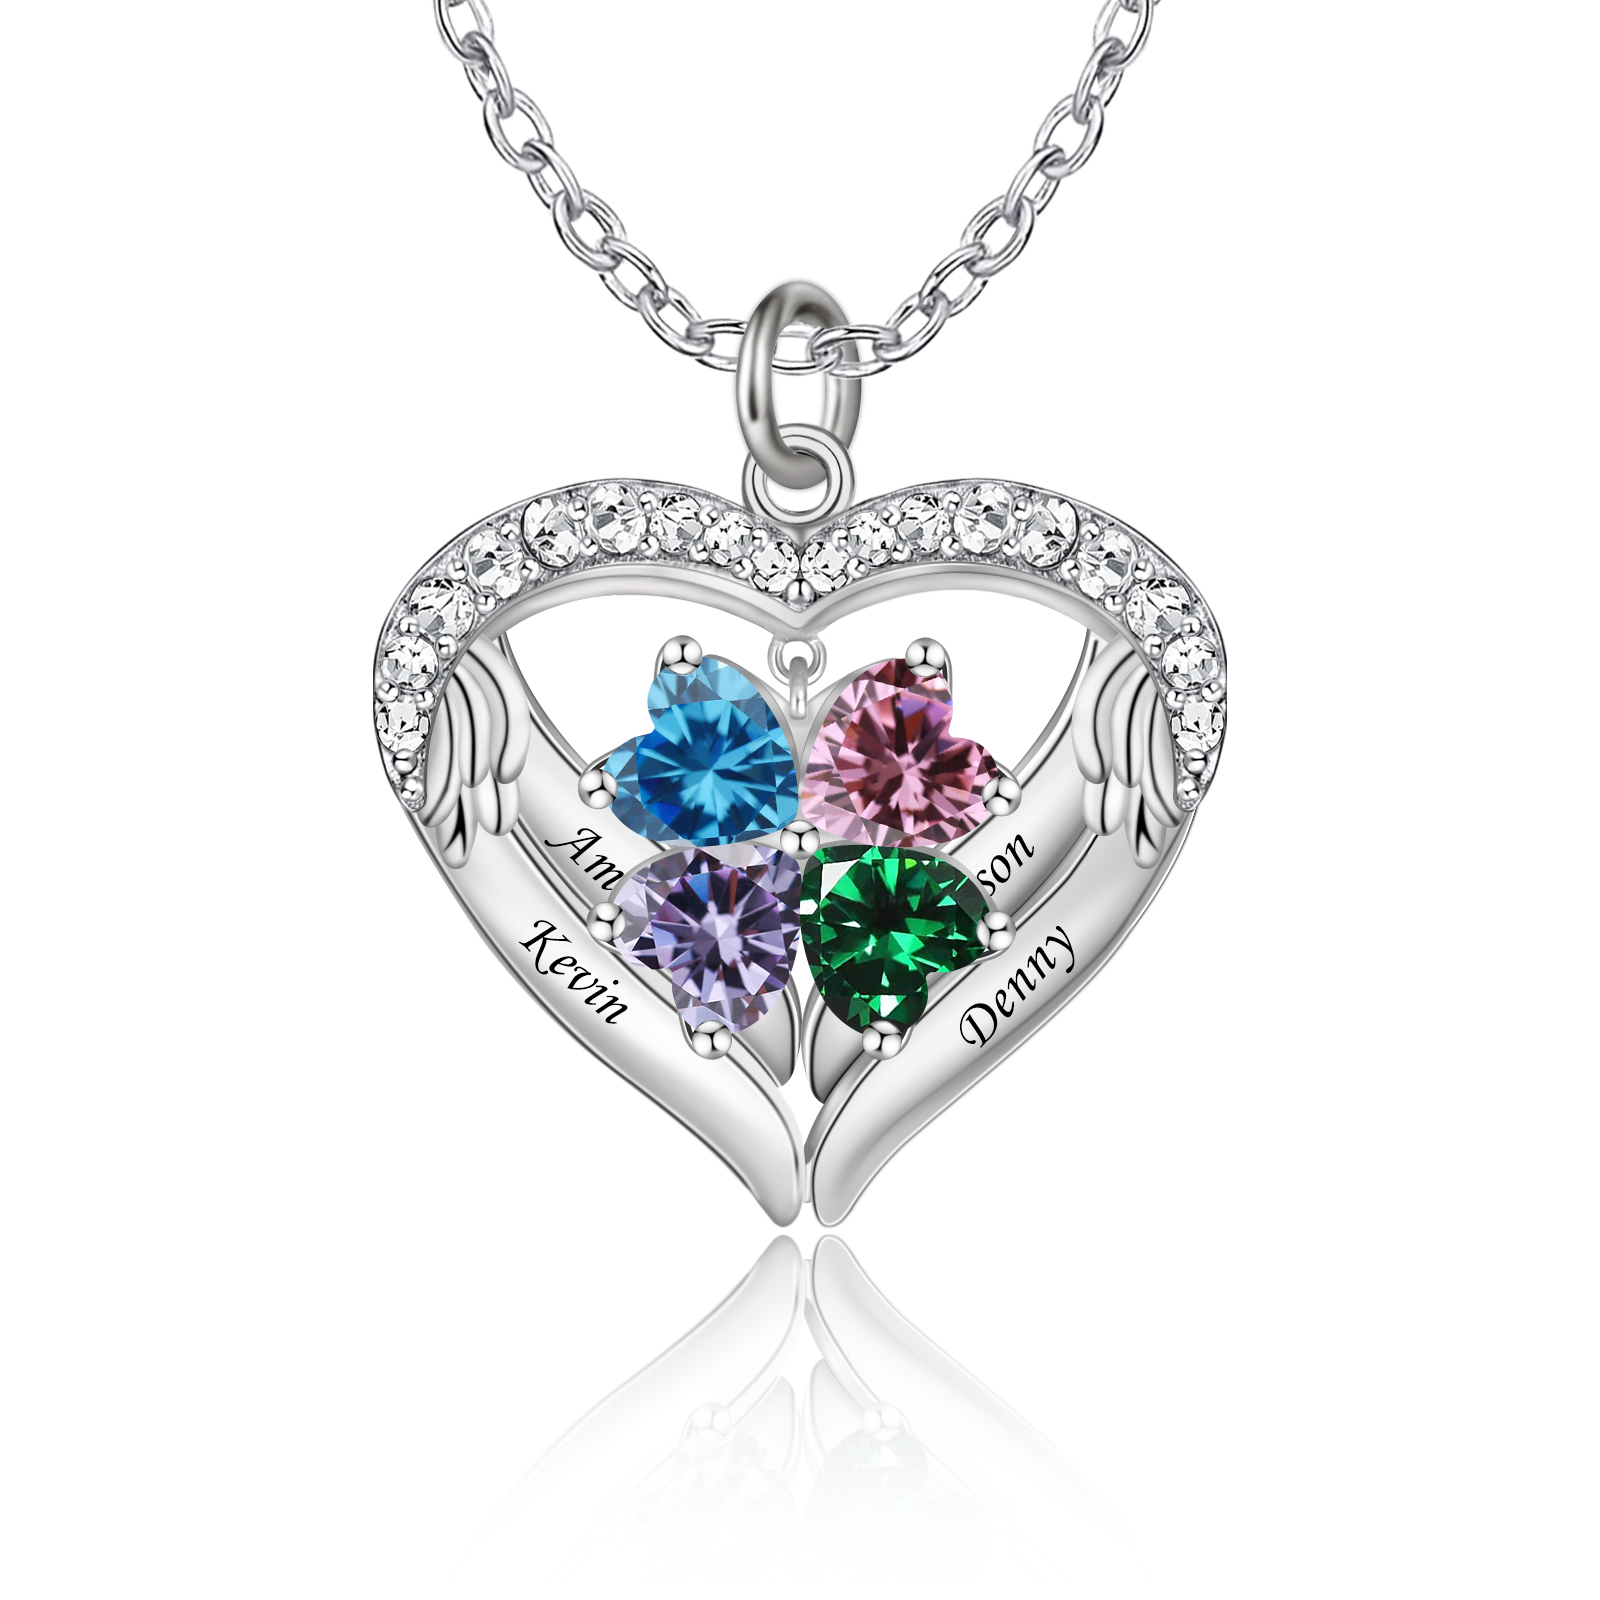 Personalized Heart Pendant Necklace wtin four Birthstones